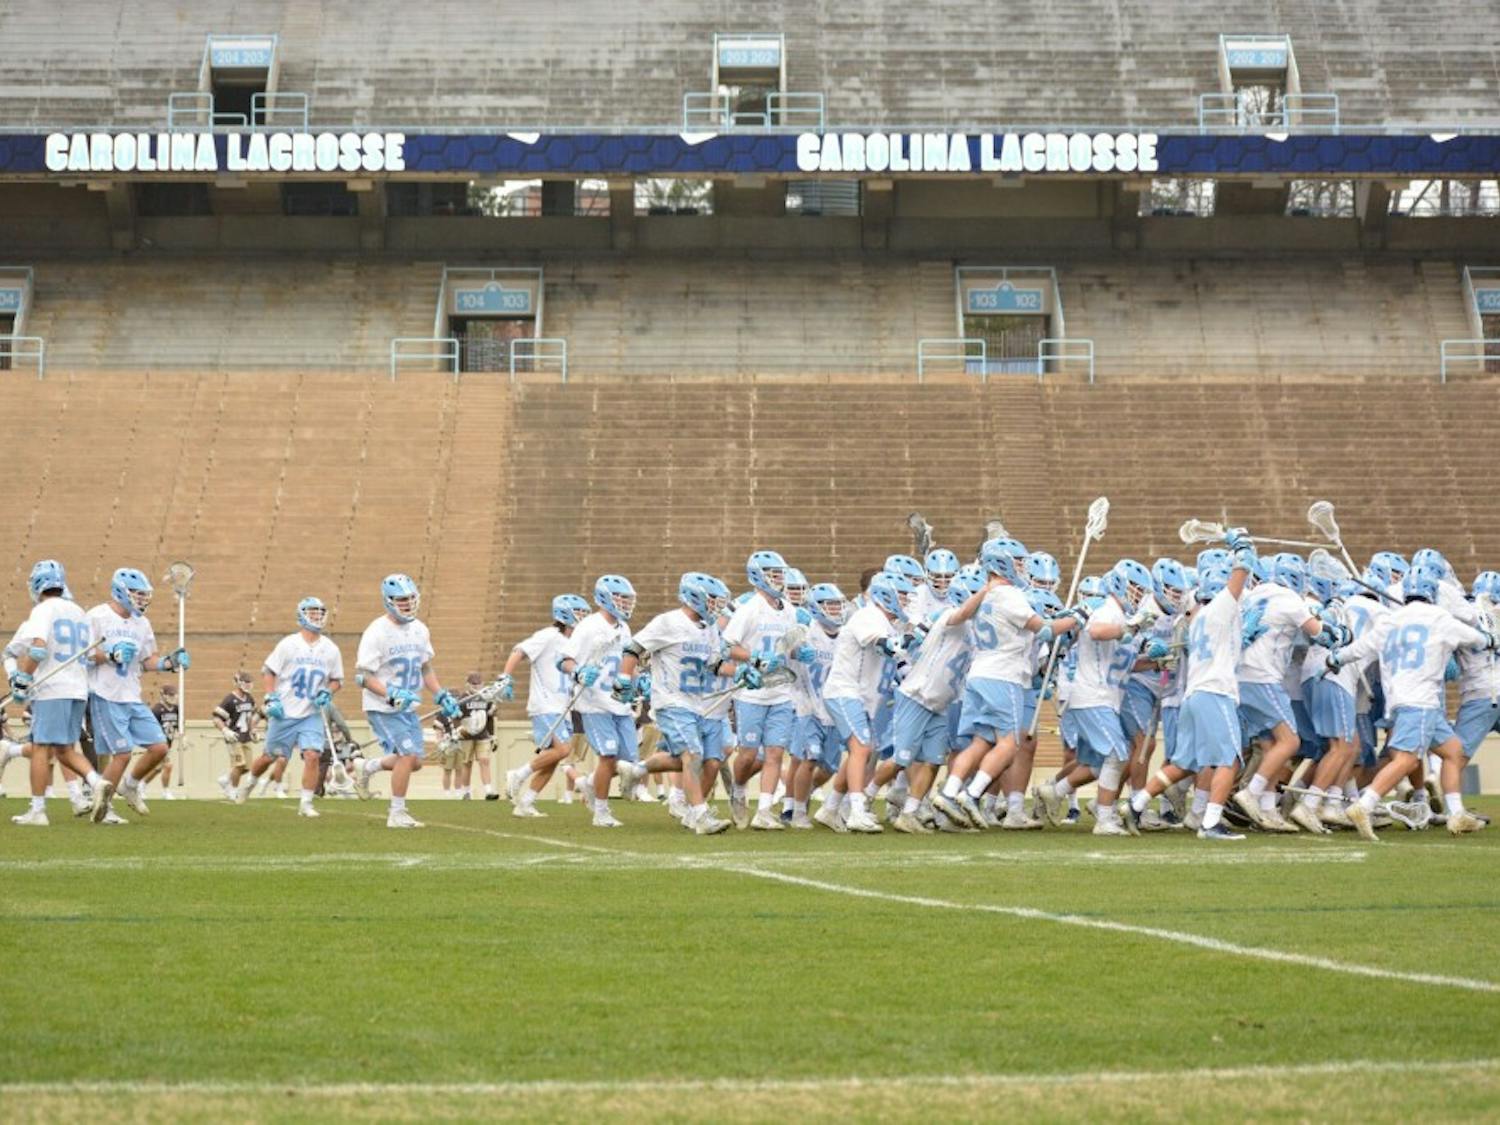 The UNC men's lacrosse team celebrates after a 12-11 overtime win against Lehigh on Feb. 17 in Kenan Stadium.